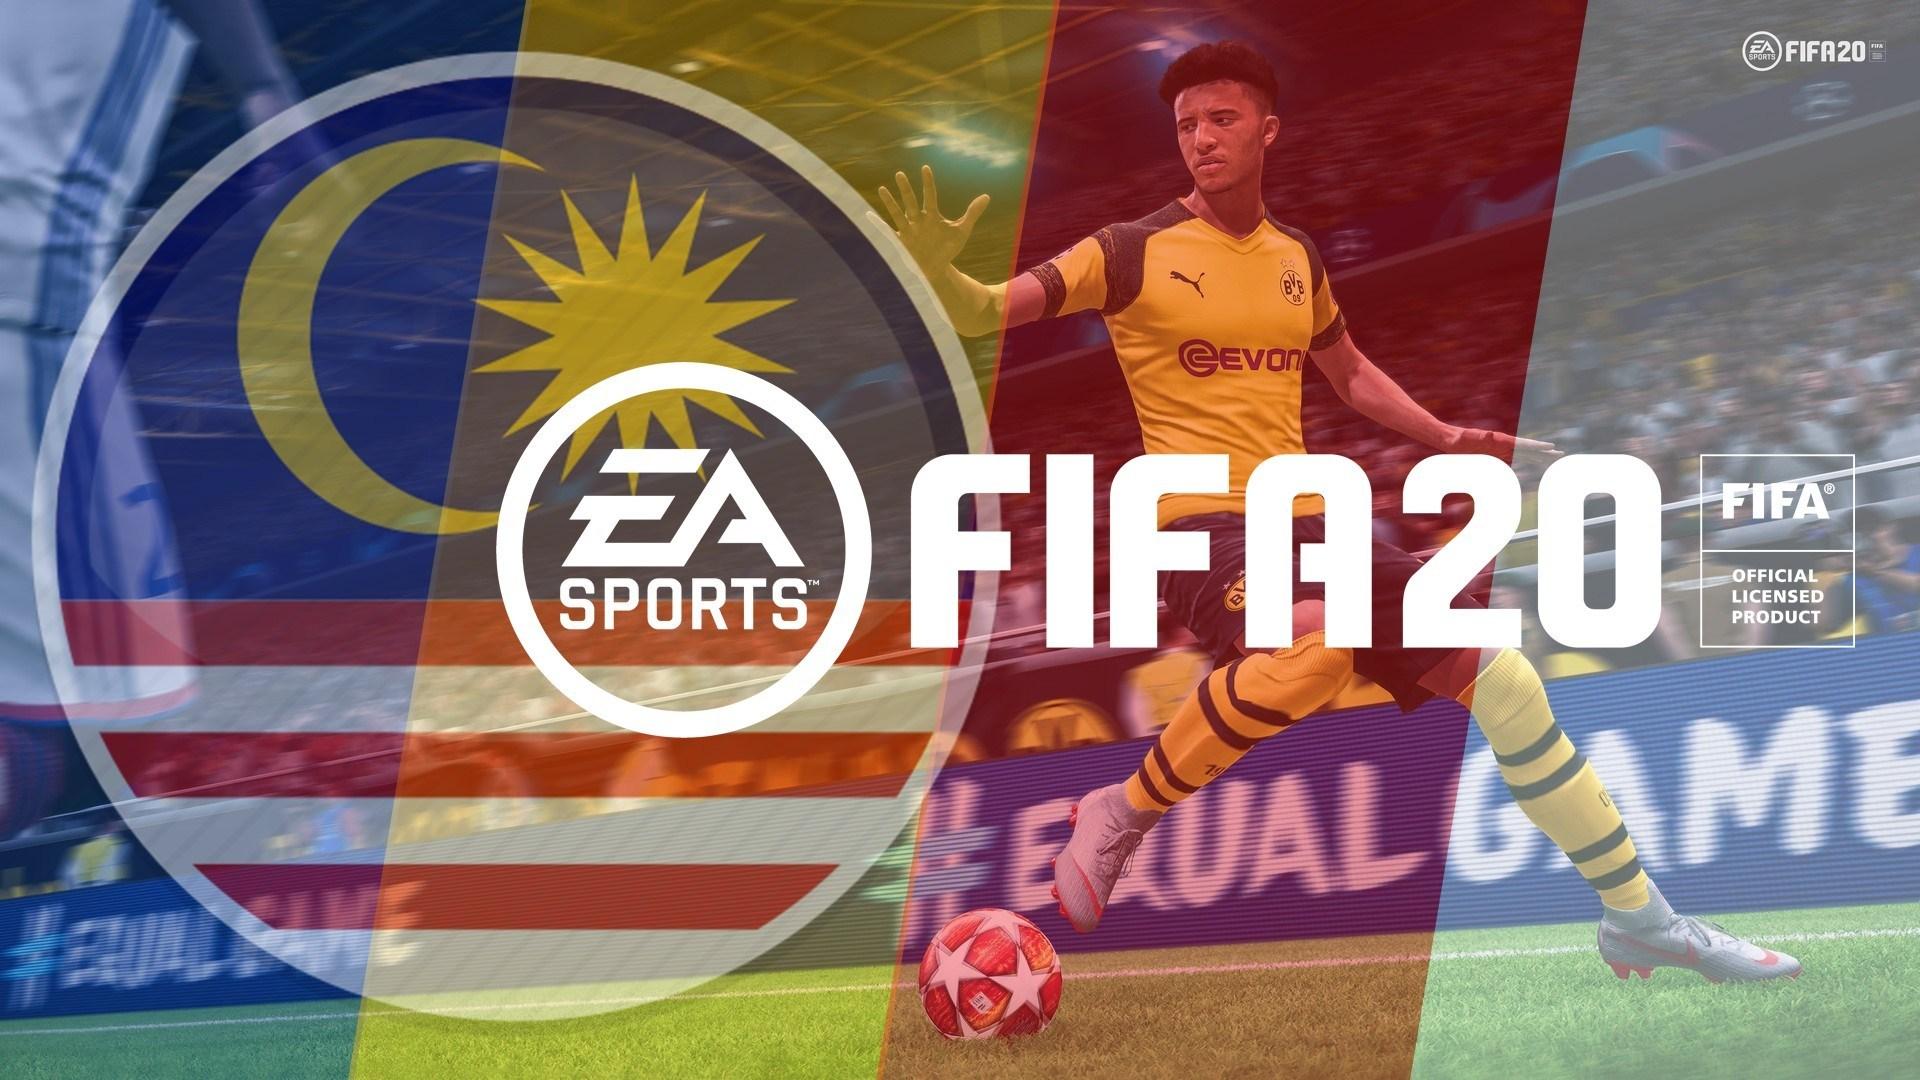 FIFA 20 Chance Malaysian League Will be Featured